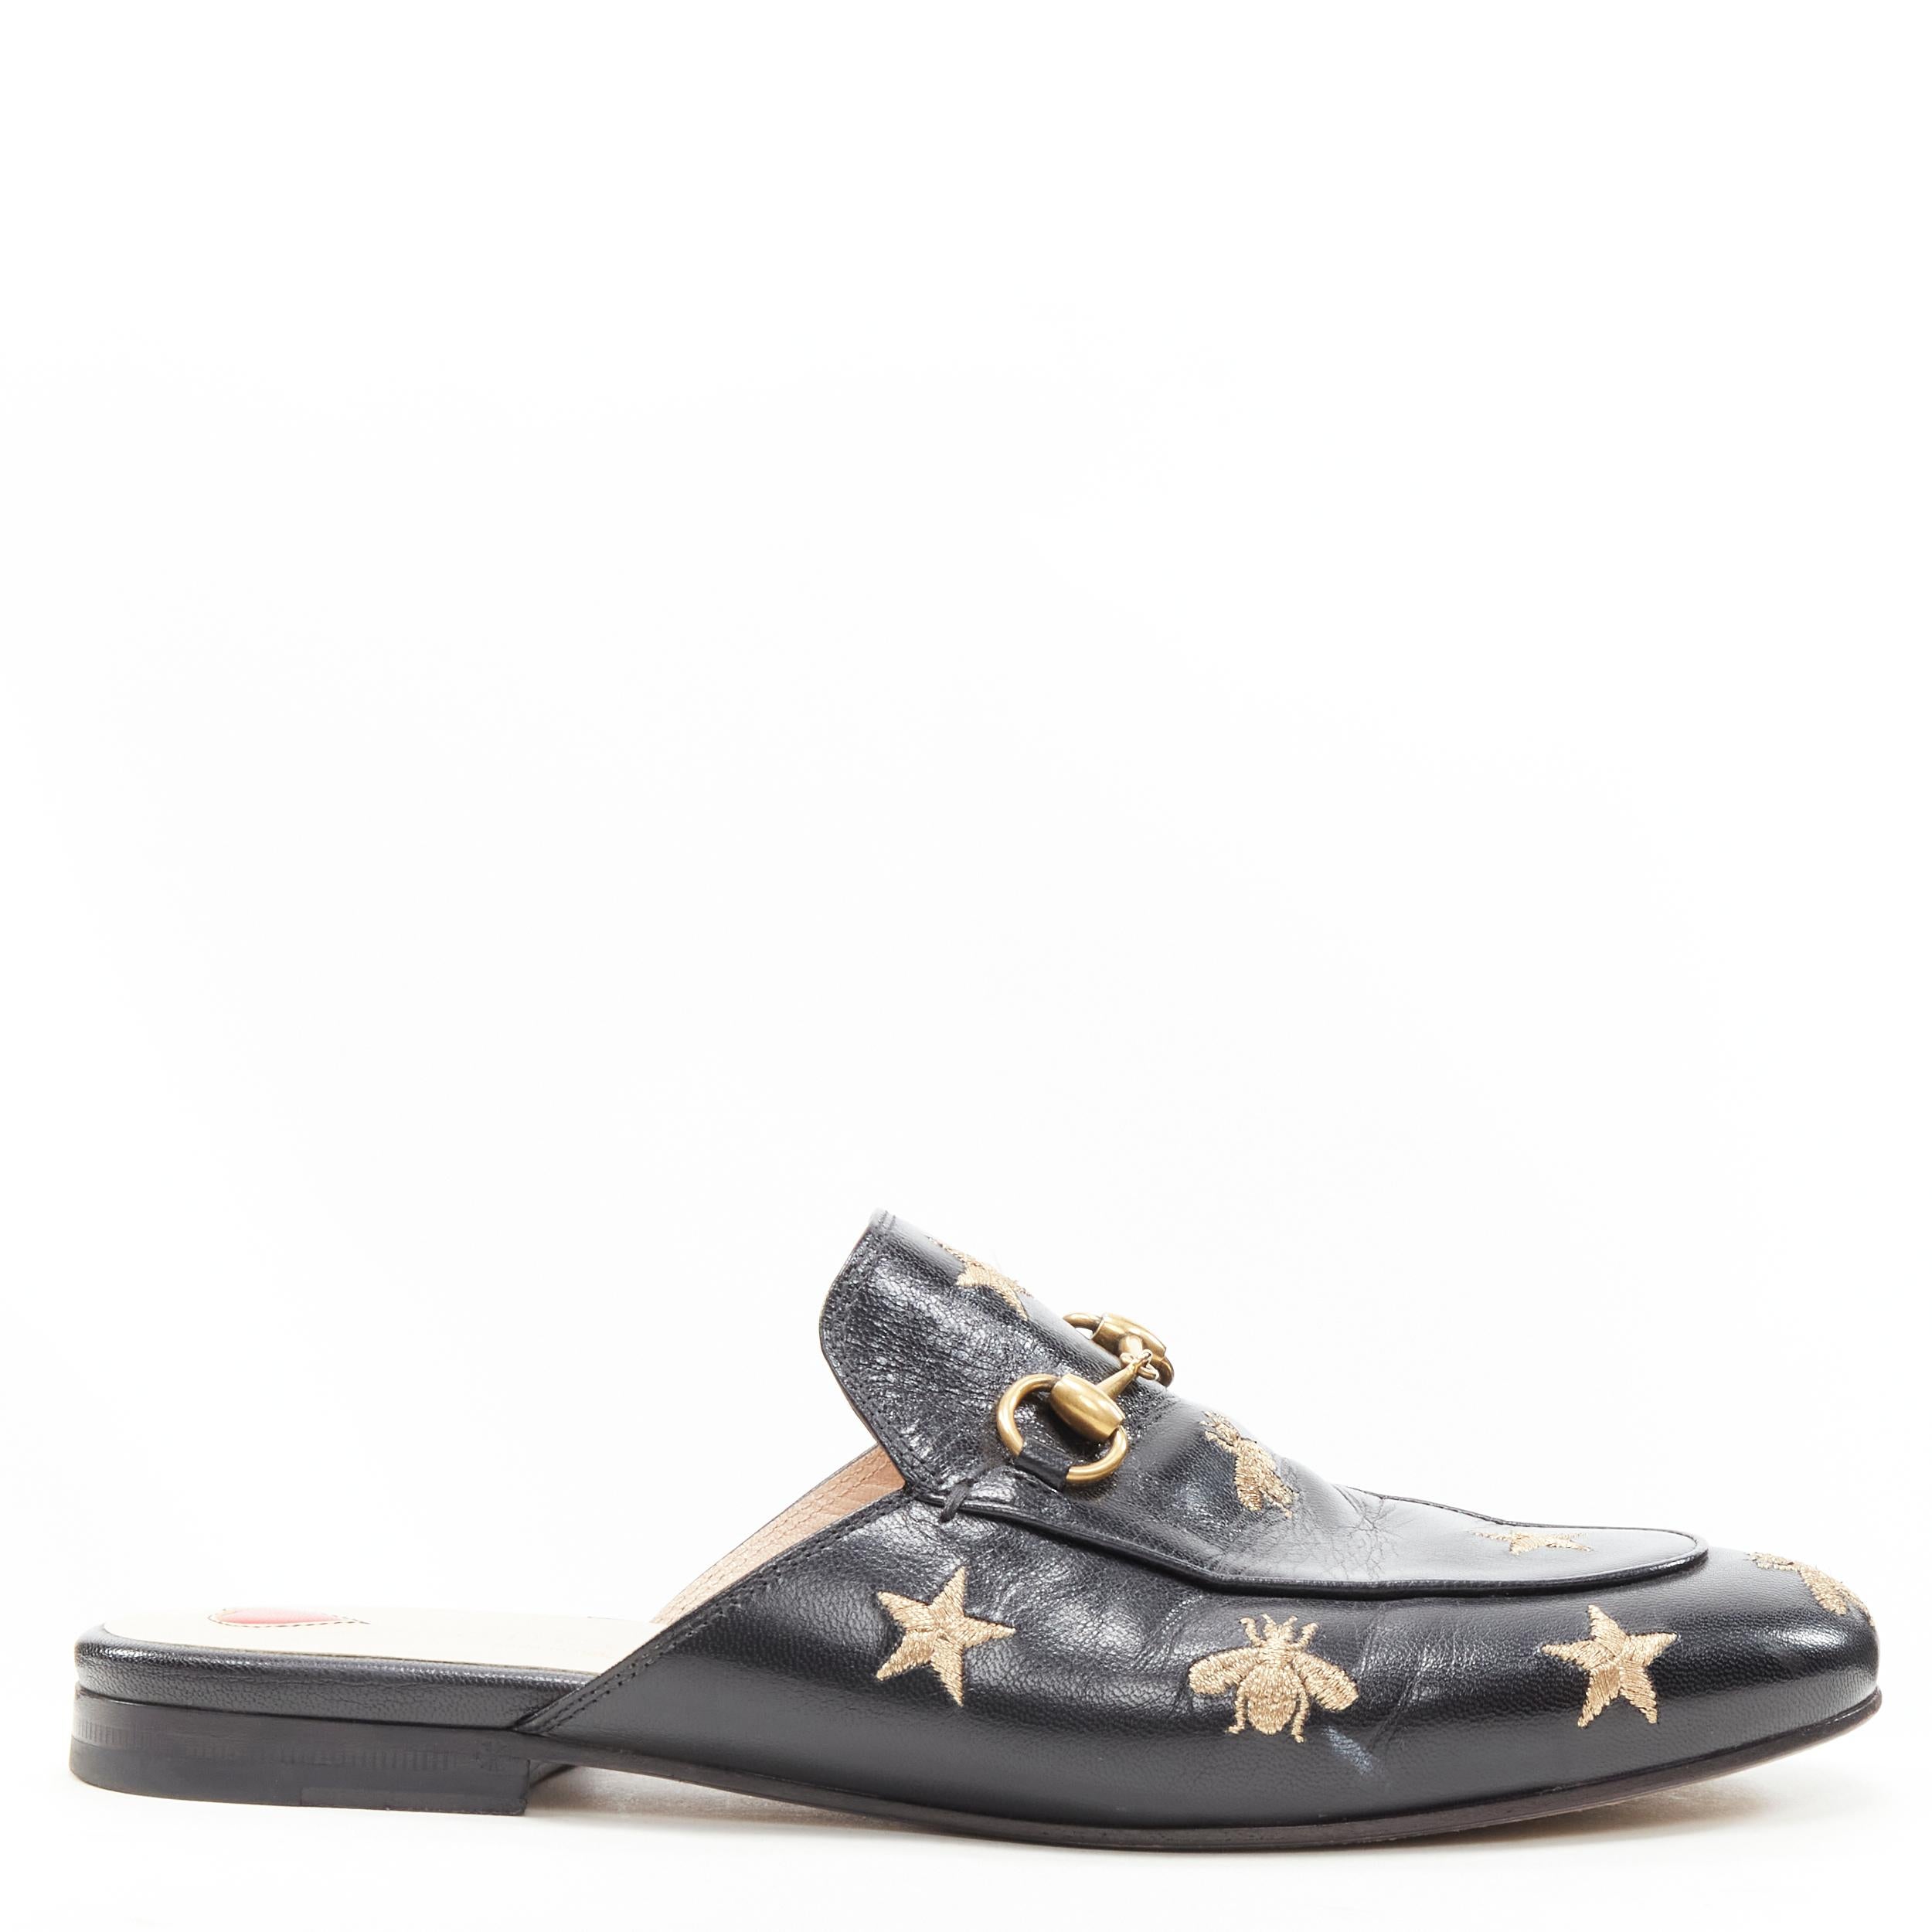 GUCCI Princetown Bees & Stars black gold horsebit loafer slippers EU37.5 
Reference: LNKO/A01932 
Brand: Gucci 
Designer: Alessandro Michele 
Model: Princetown 
Material: Leather 
Color: Black 
Pattern: Bee 
Extra Detail: 505268-D3V00-1000.